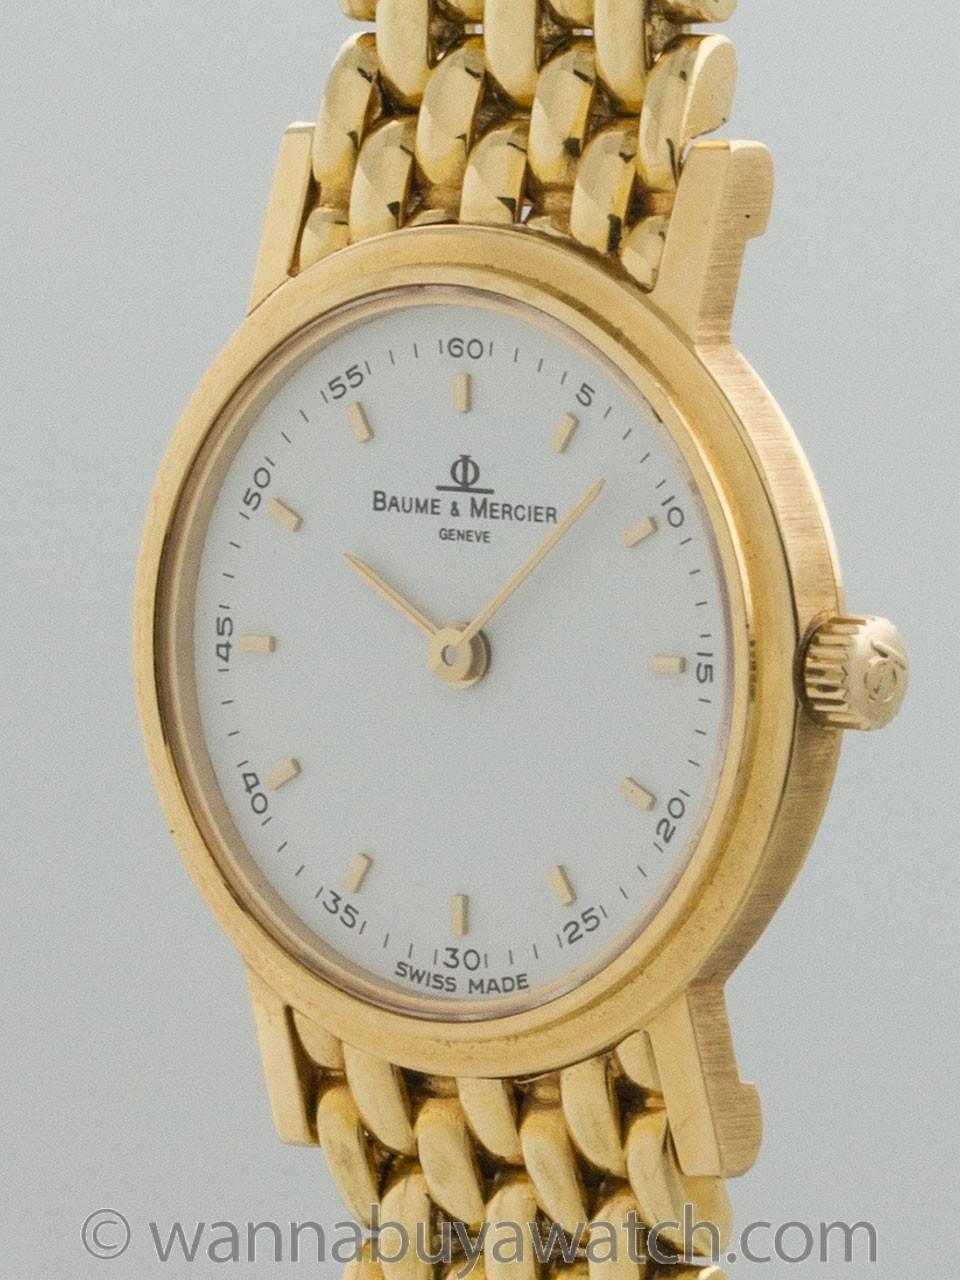 Baume & Mercier women's Gala 18K Yellow Gold Dress Model ref 16746 circa 1990s. 22 x 27mm case with smooth bezel and signed crown. Original white dial with applied gold indexes and hands. Powered by quartz battery. On associated 18K yellow gold rice